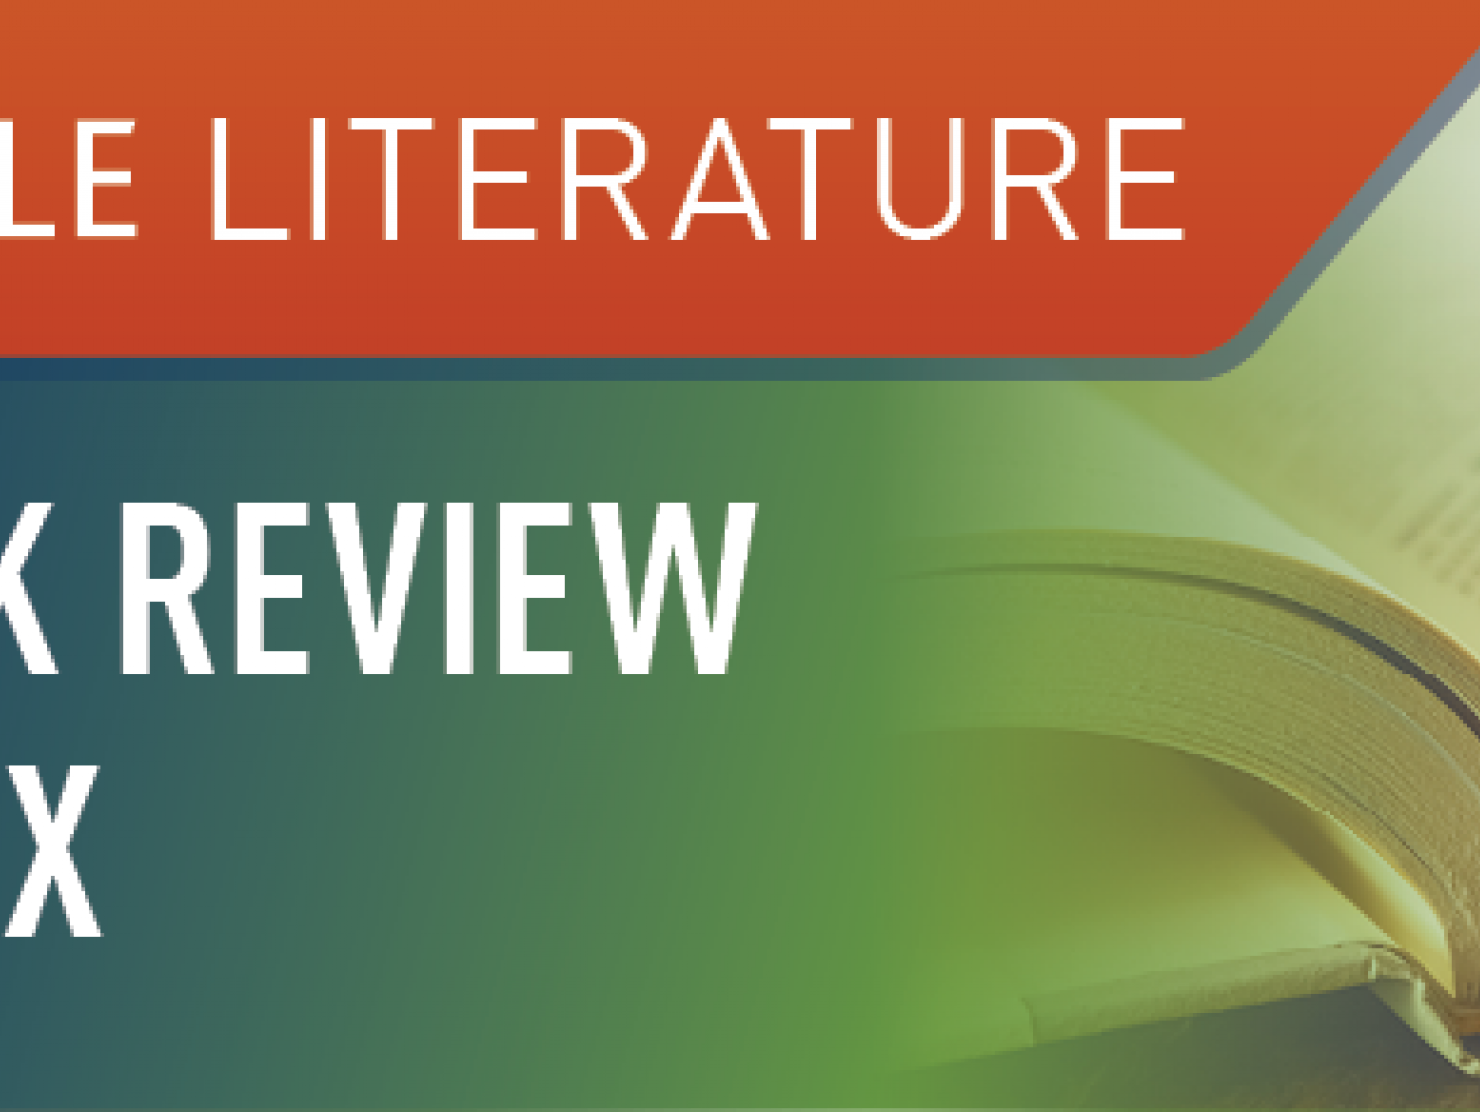 gale literature book review index